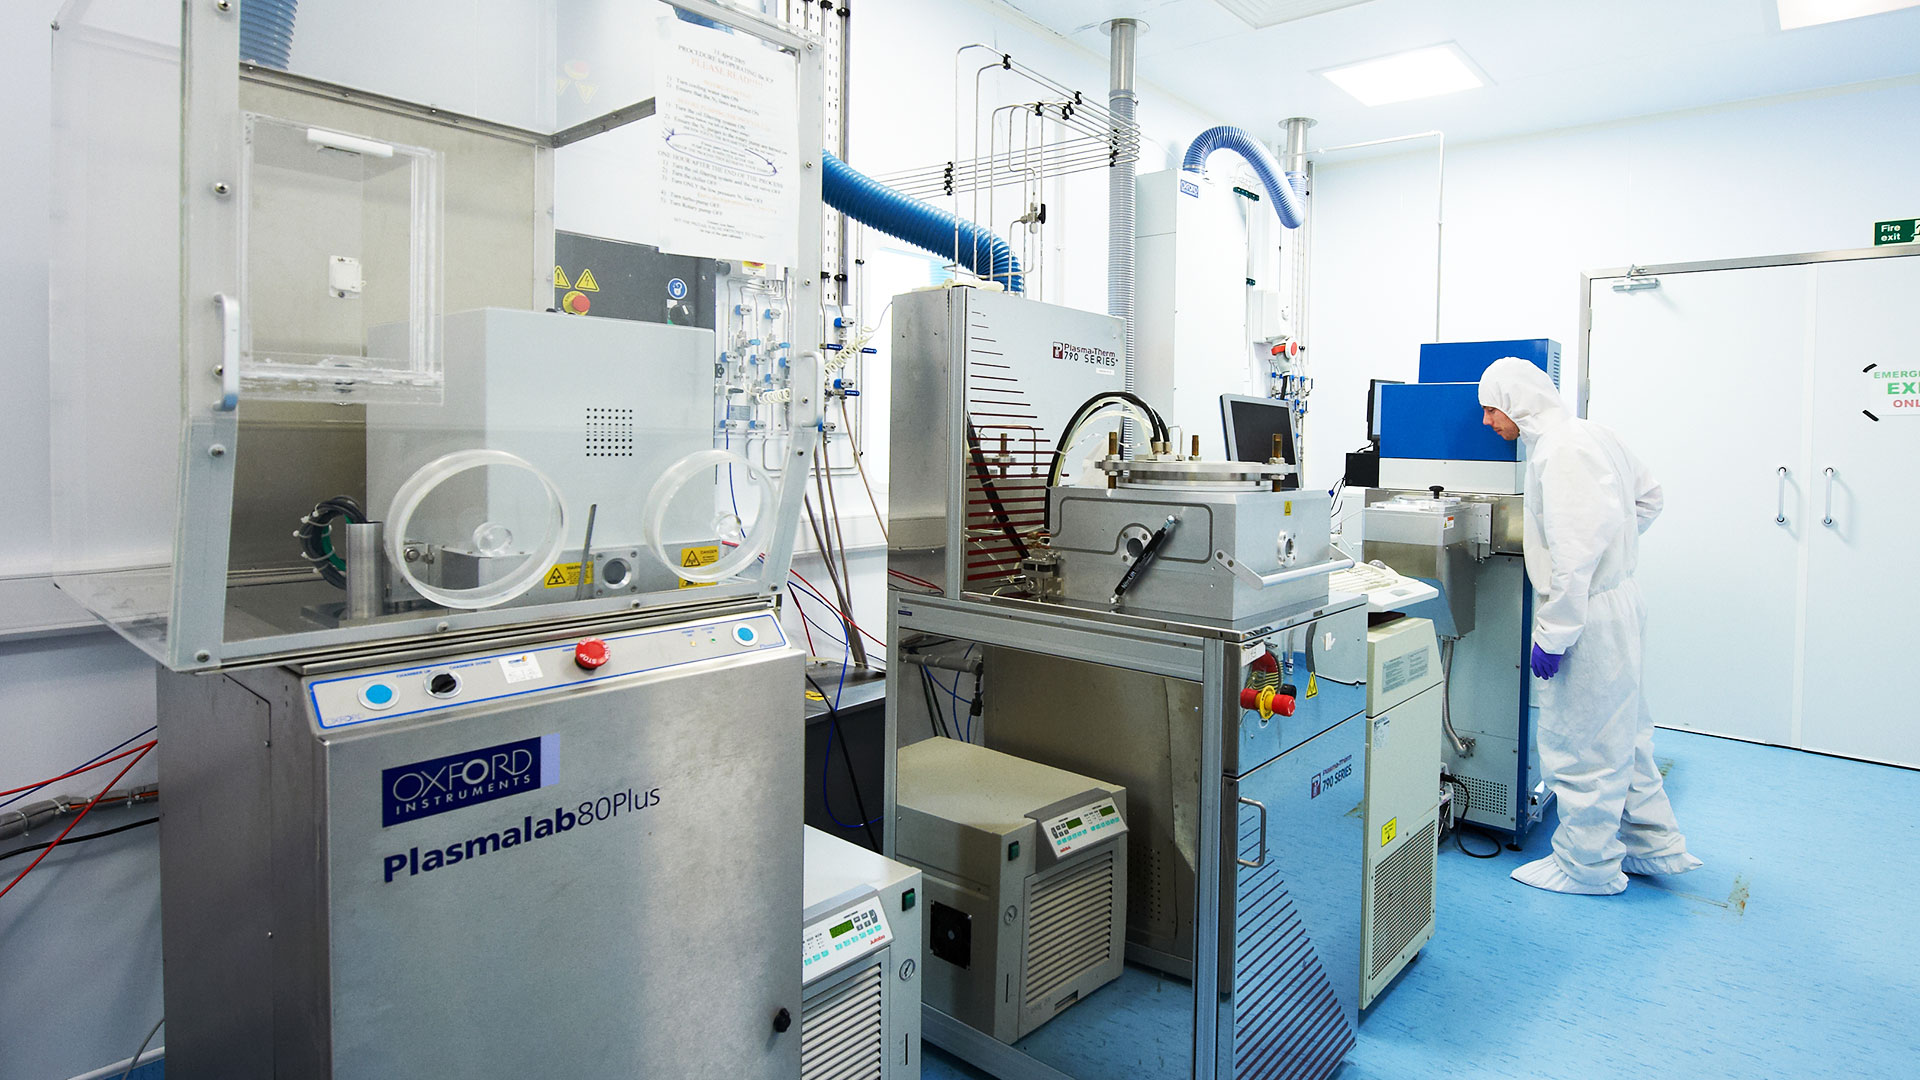 A researcher using specialist materials processing equipment in the David Bullett Nanofabrication Facility